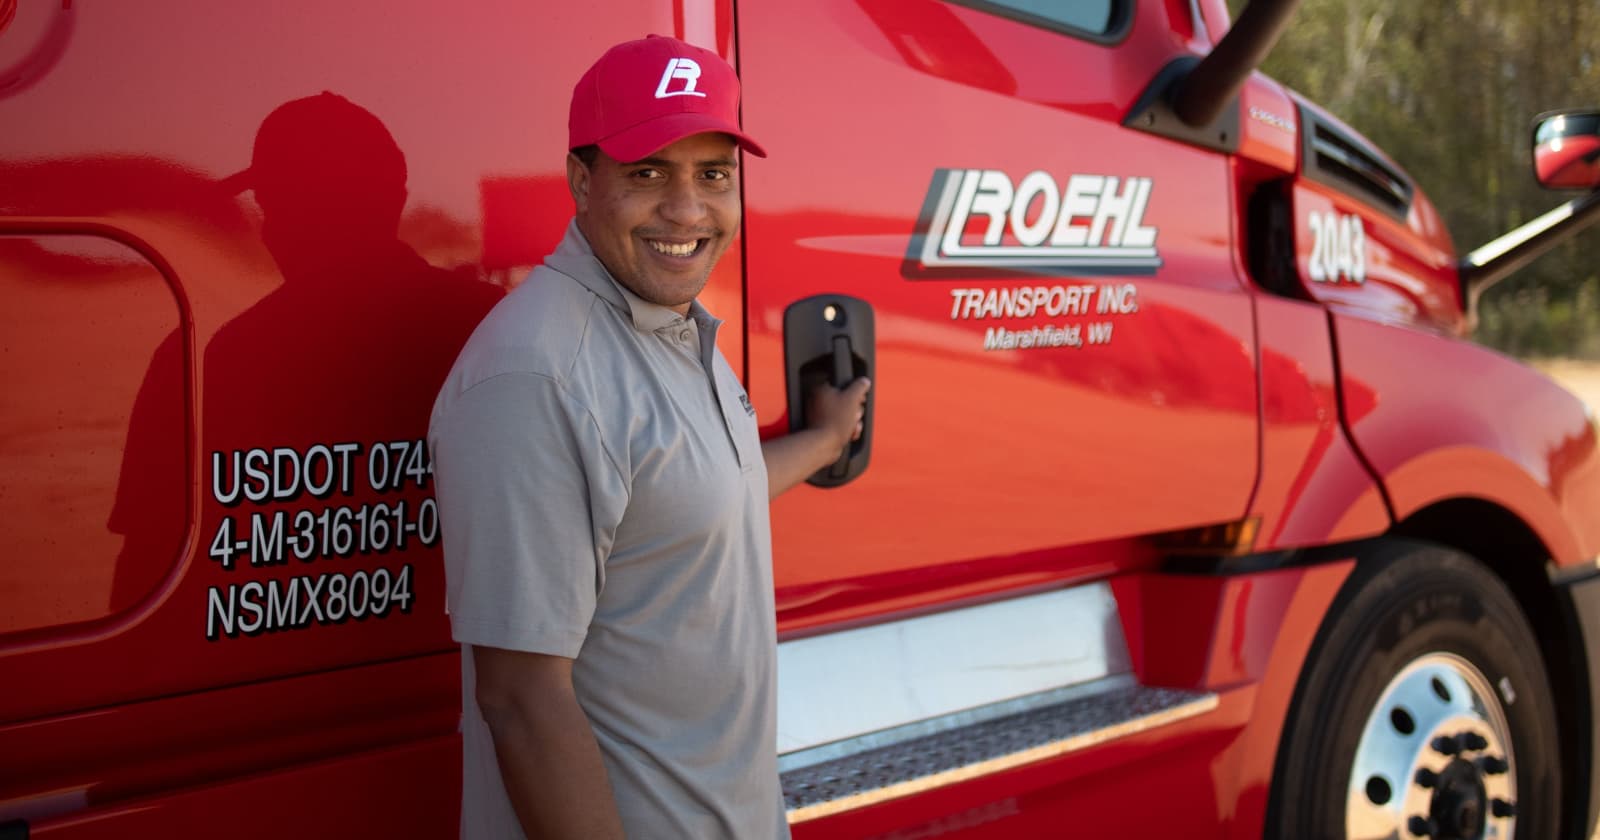 Pay Transparency Benefits Roehl Drivers Teaser